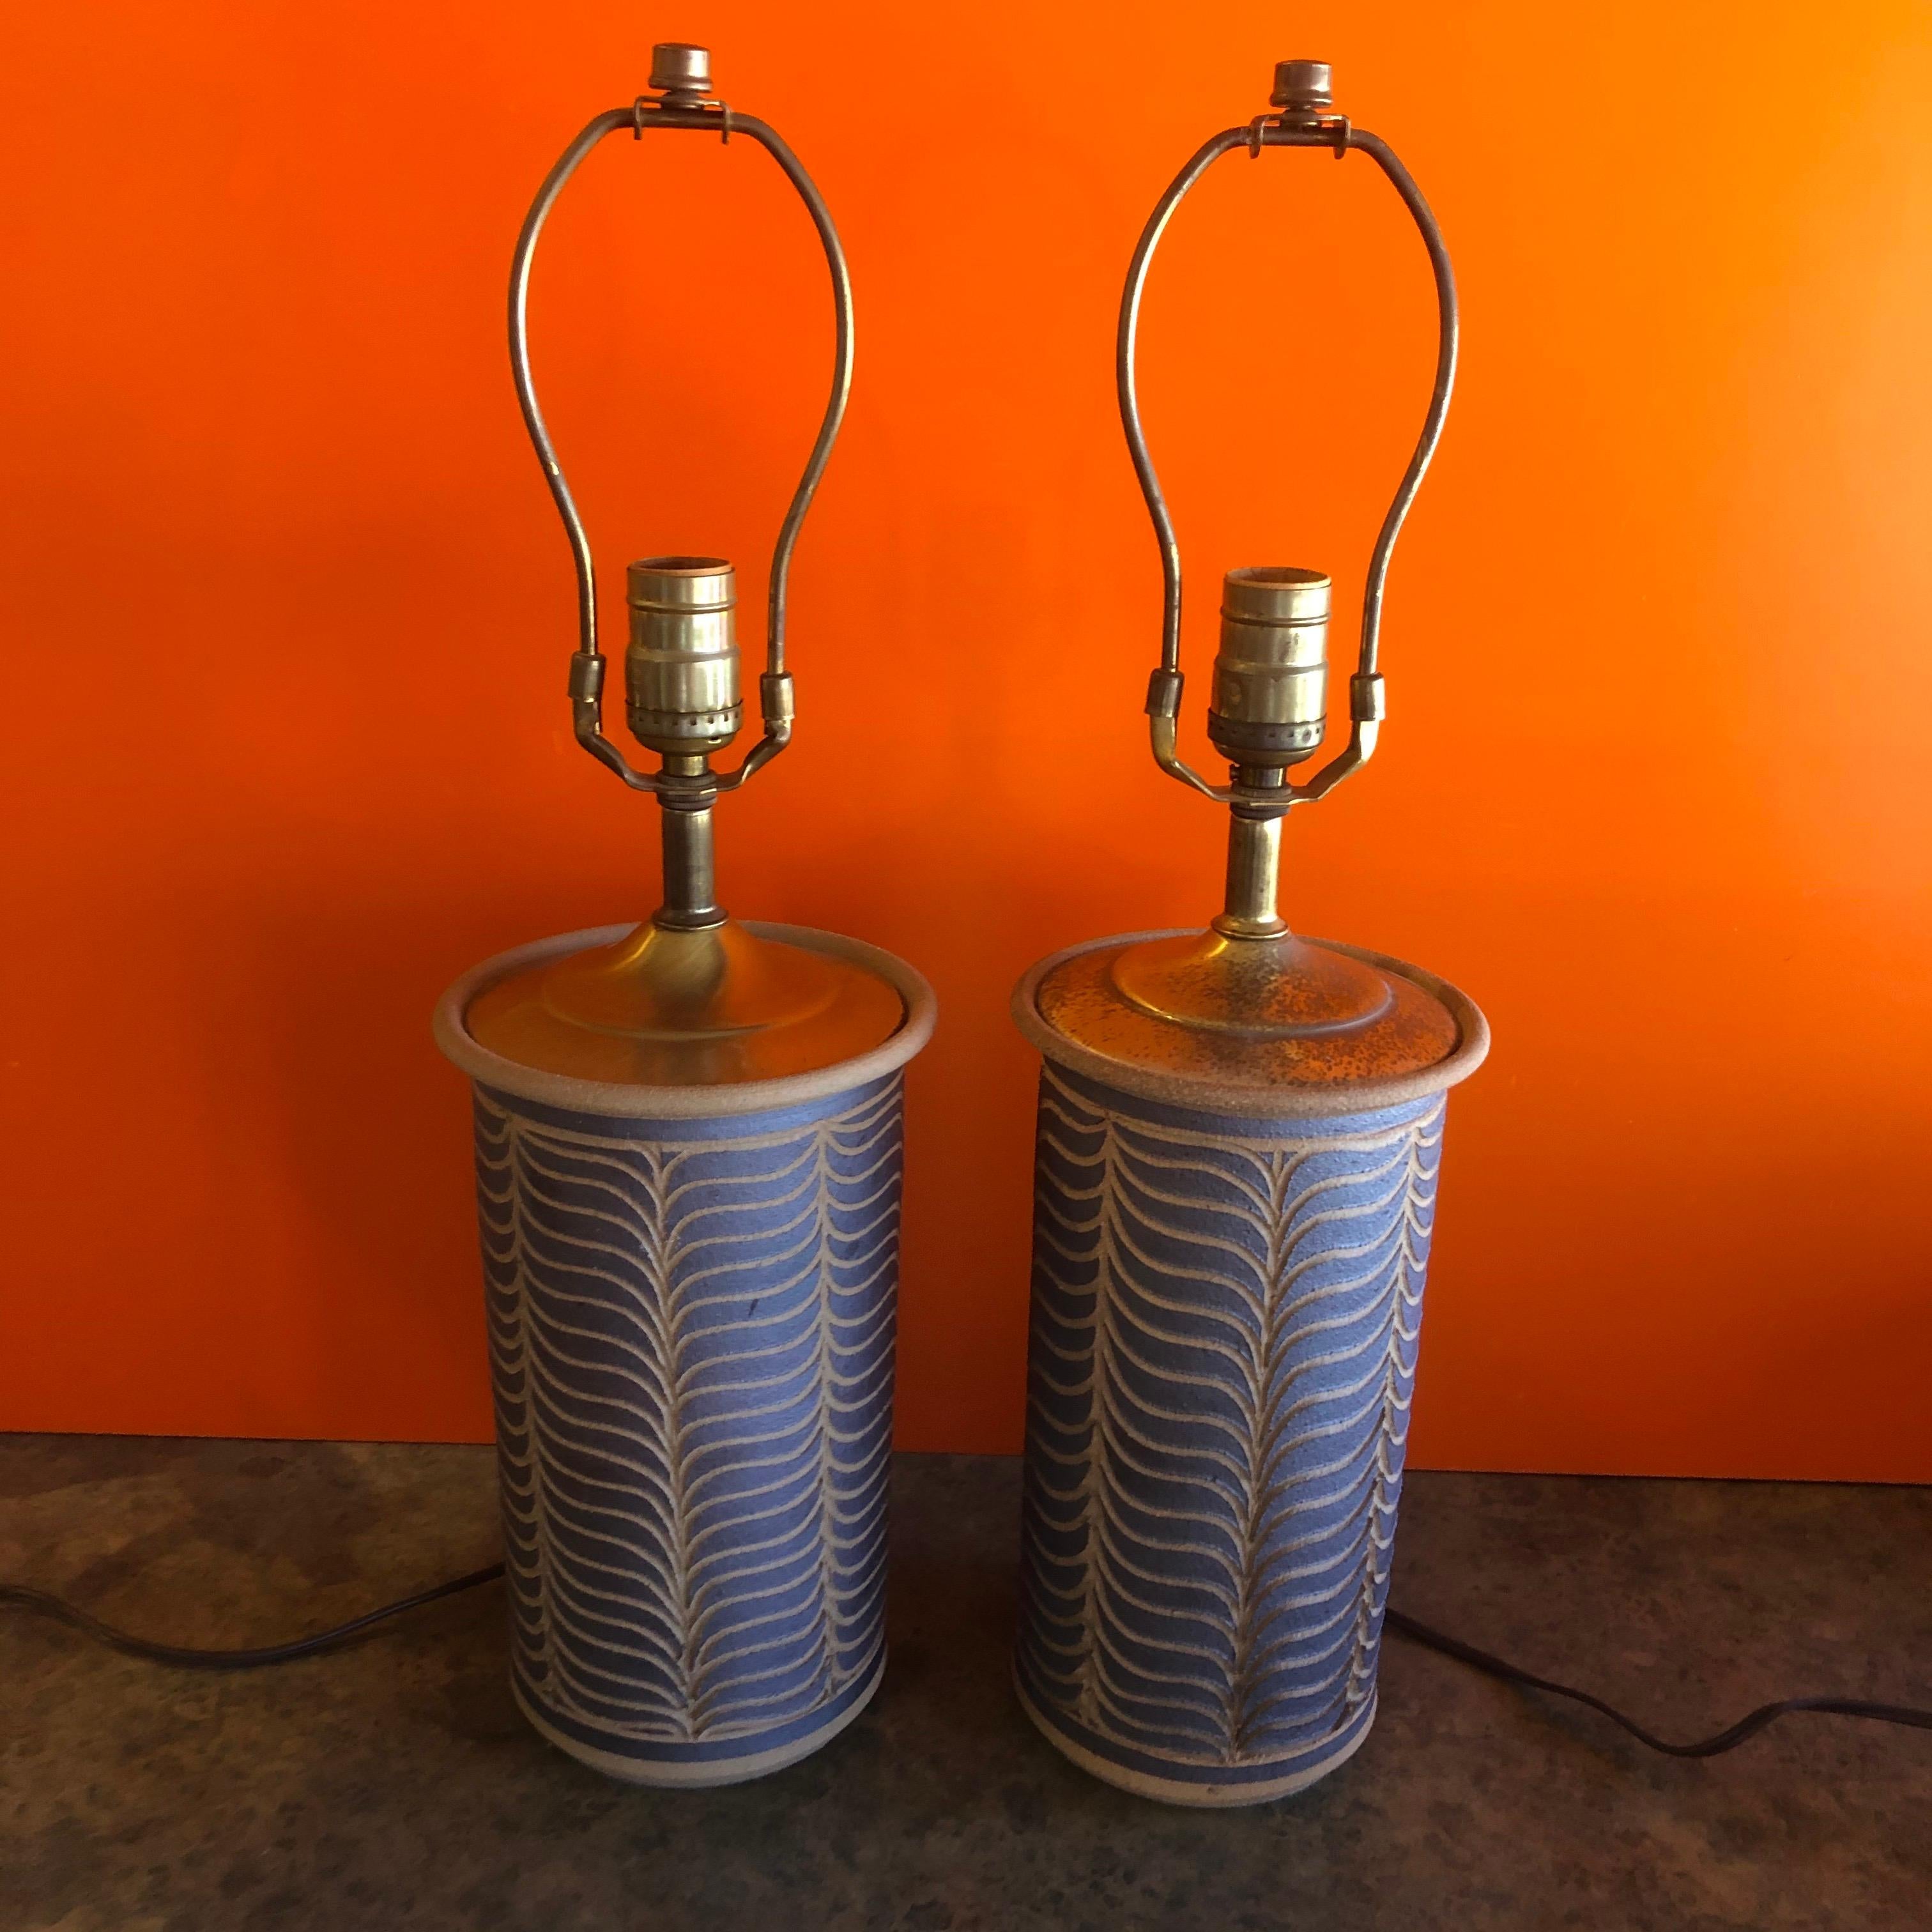 A gorgeous pair of midcentury California studio pottery stoneware table lamps, circa 1960s. The lamps, in the style of David Cressey & Robert Maxwell, measure 6.5